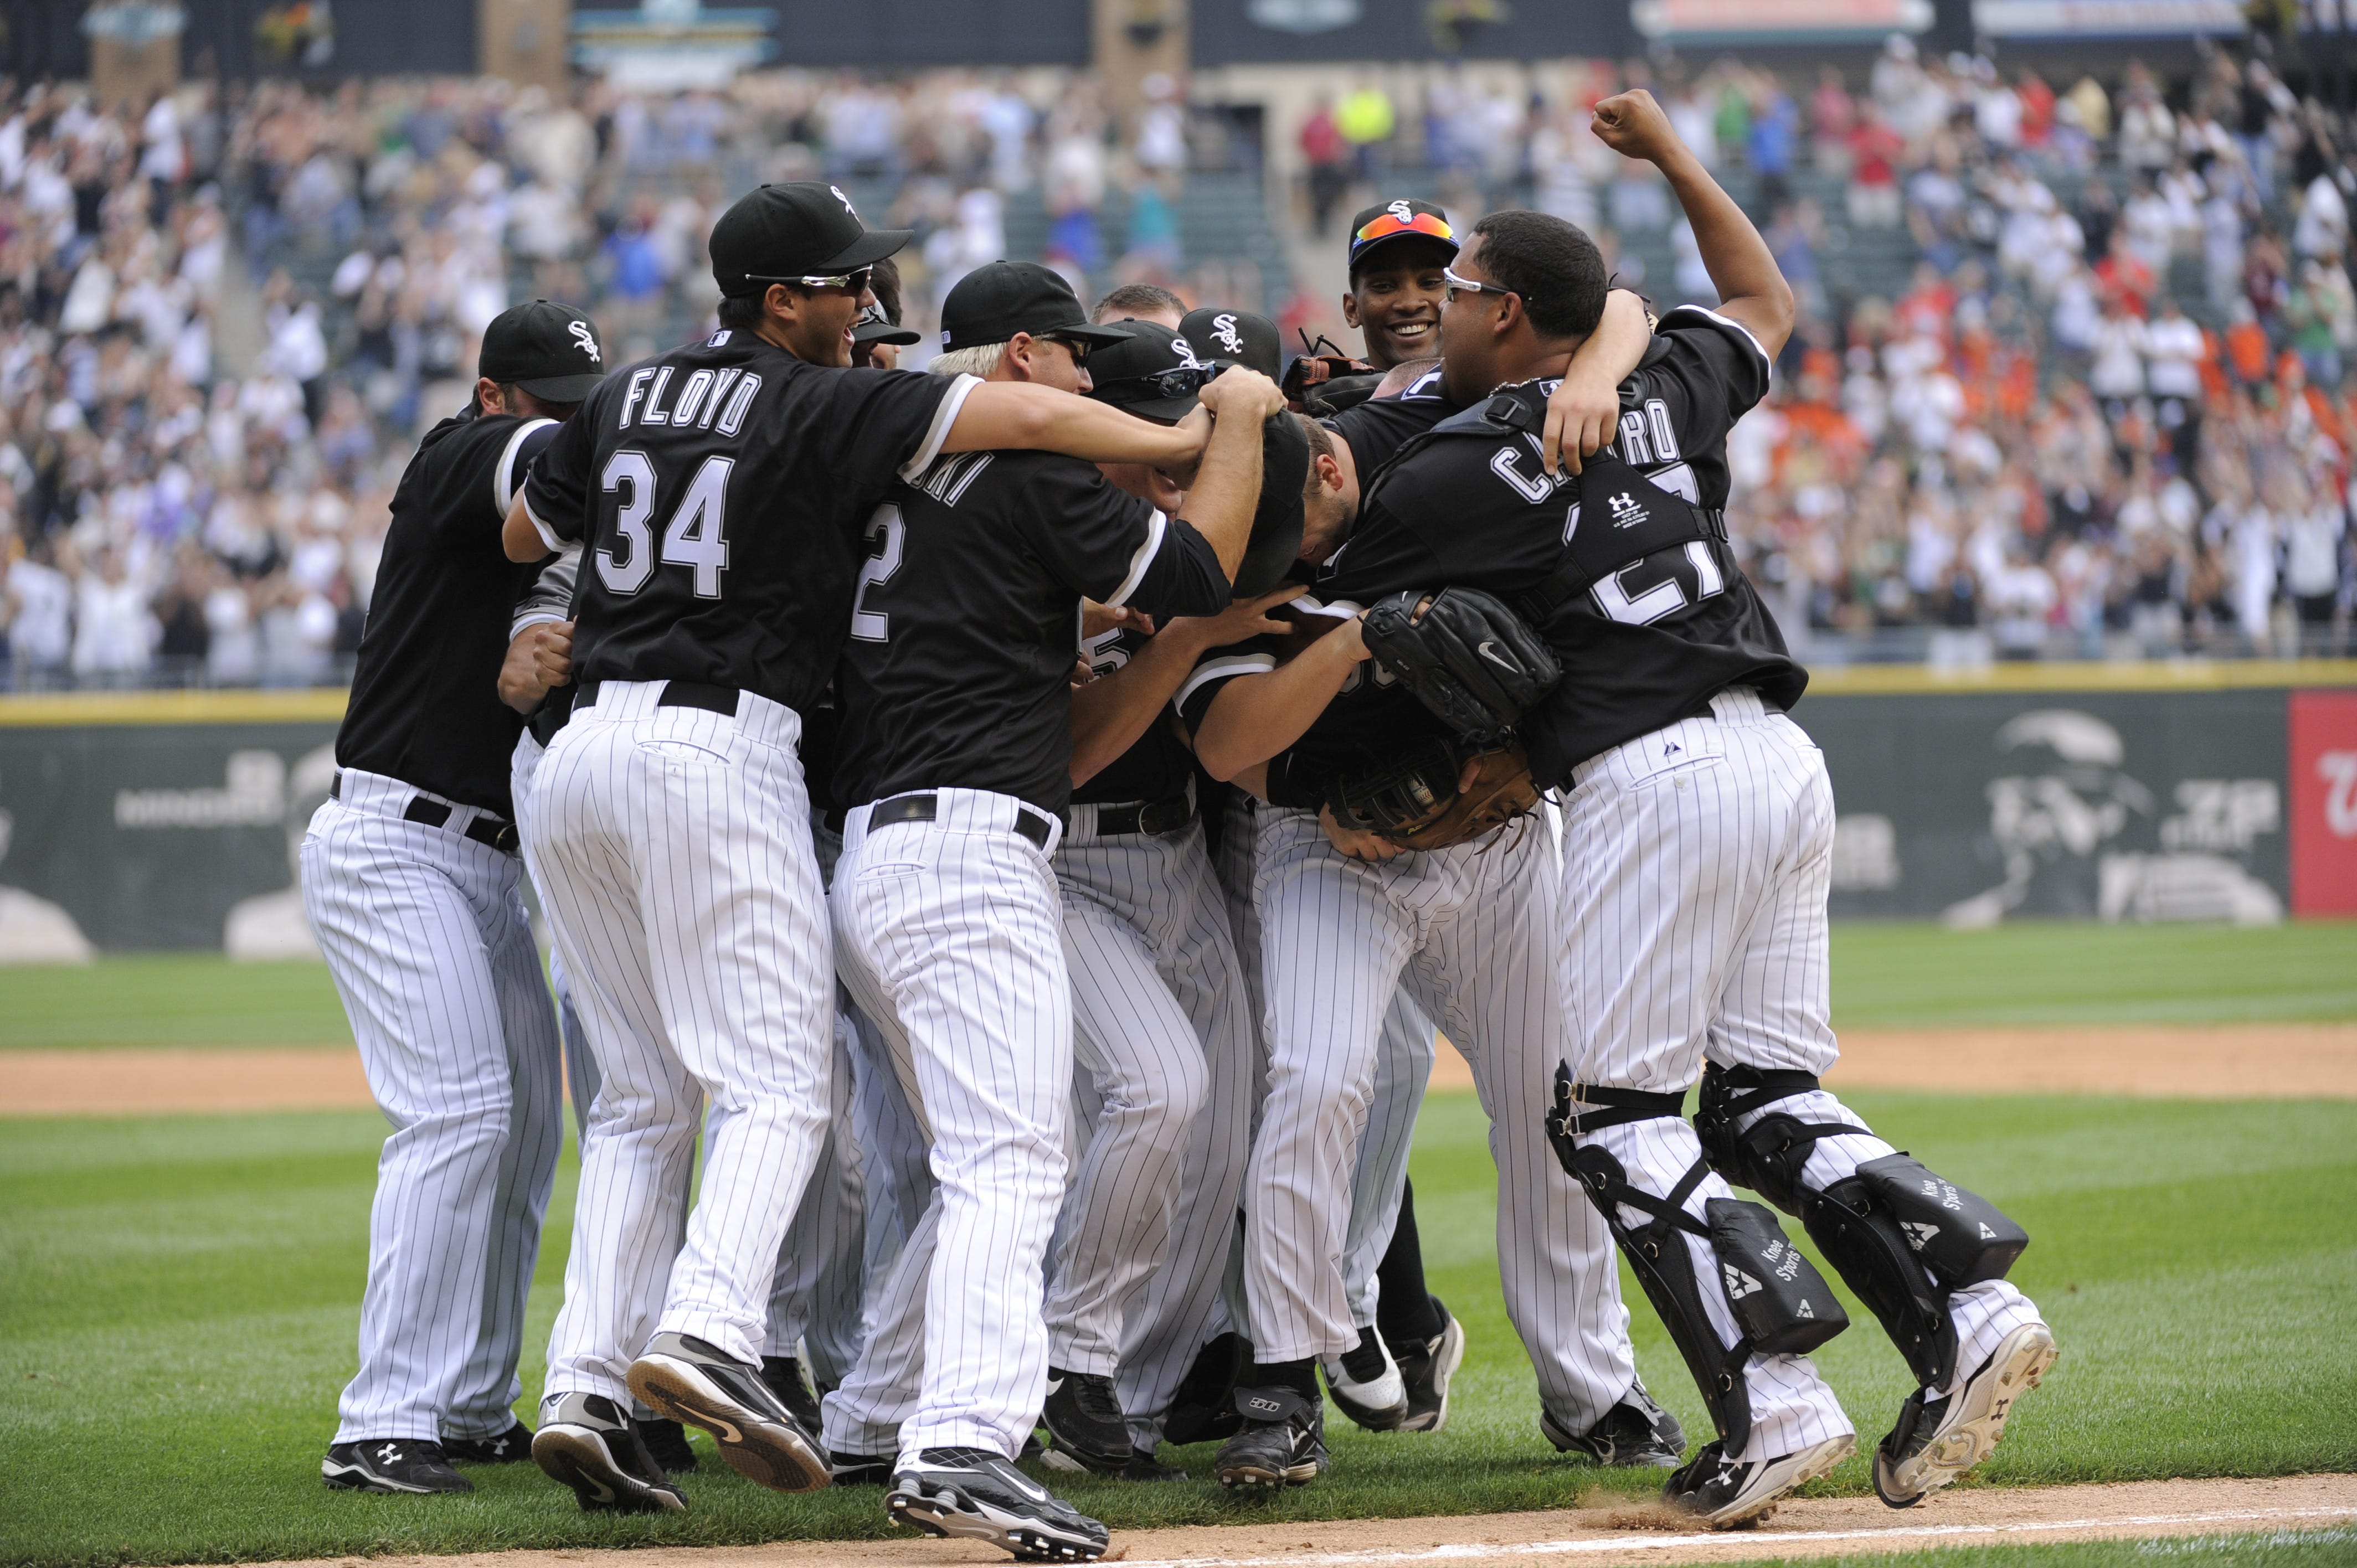 TBT: Mark Buehrle recalls his perfect game 10 years ago